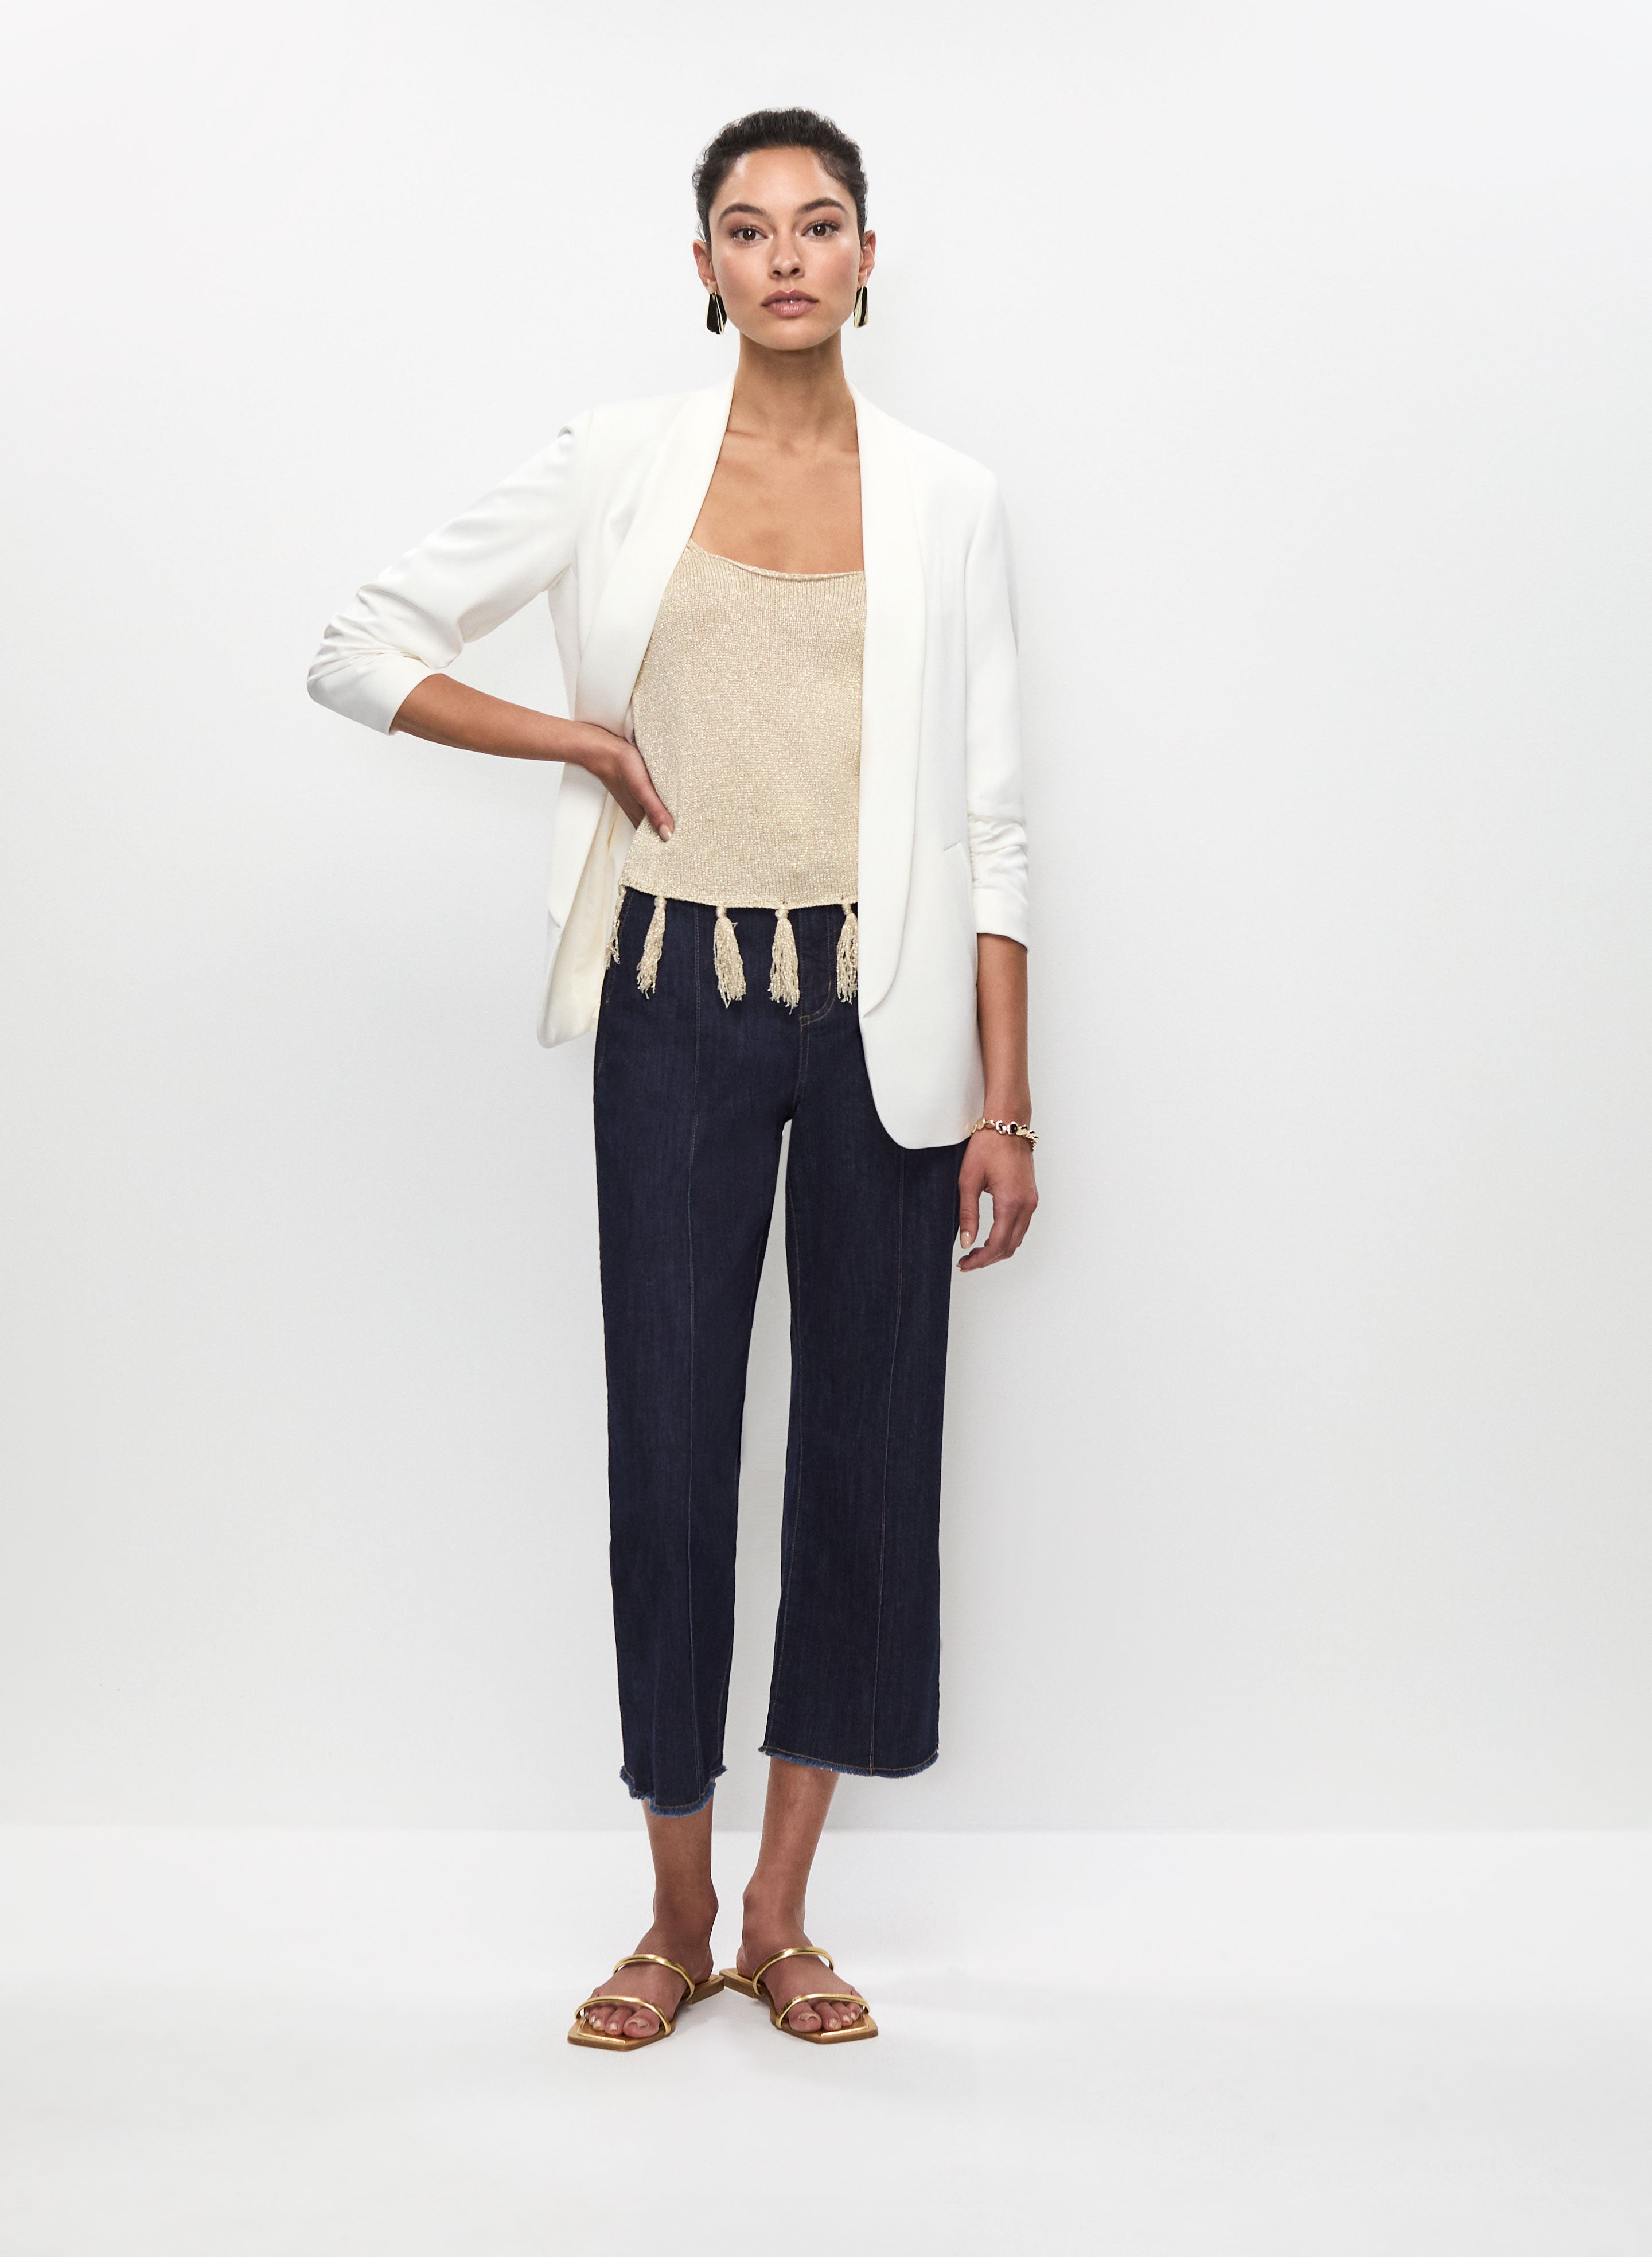 Ruched Sleeve Blazer & Flare Leg Jeans